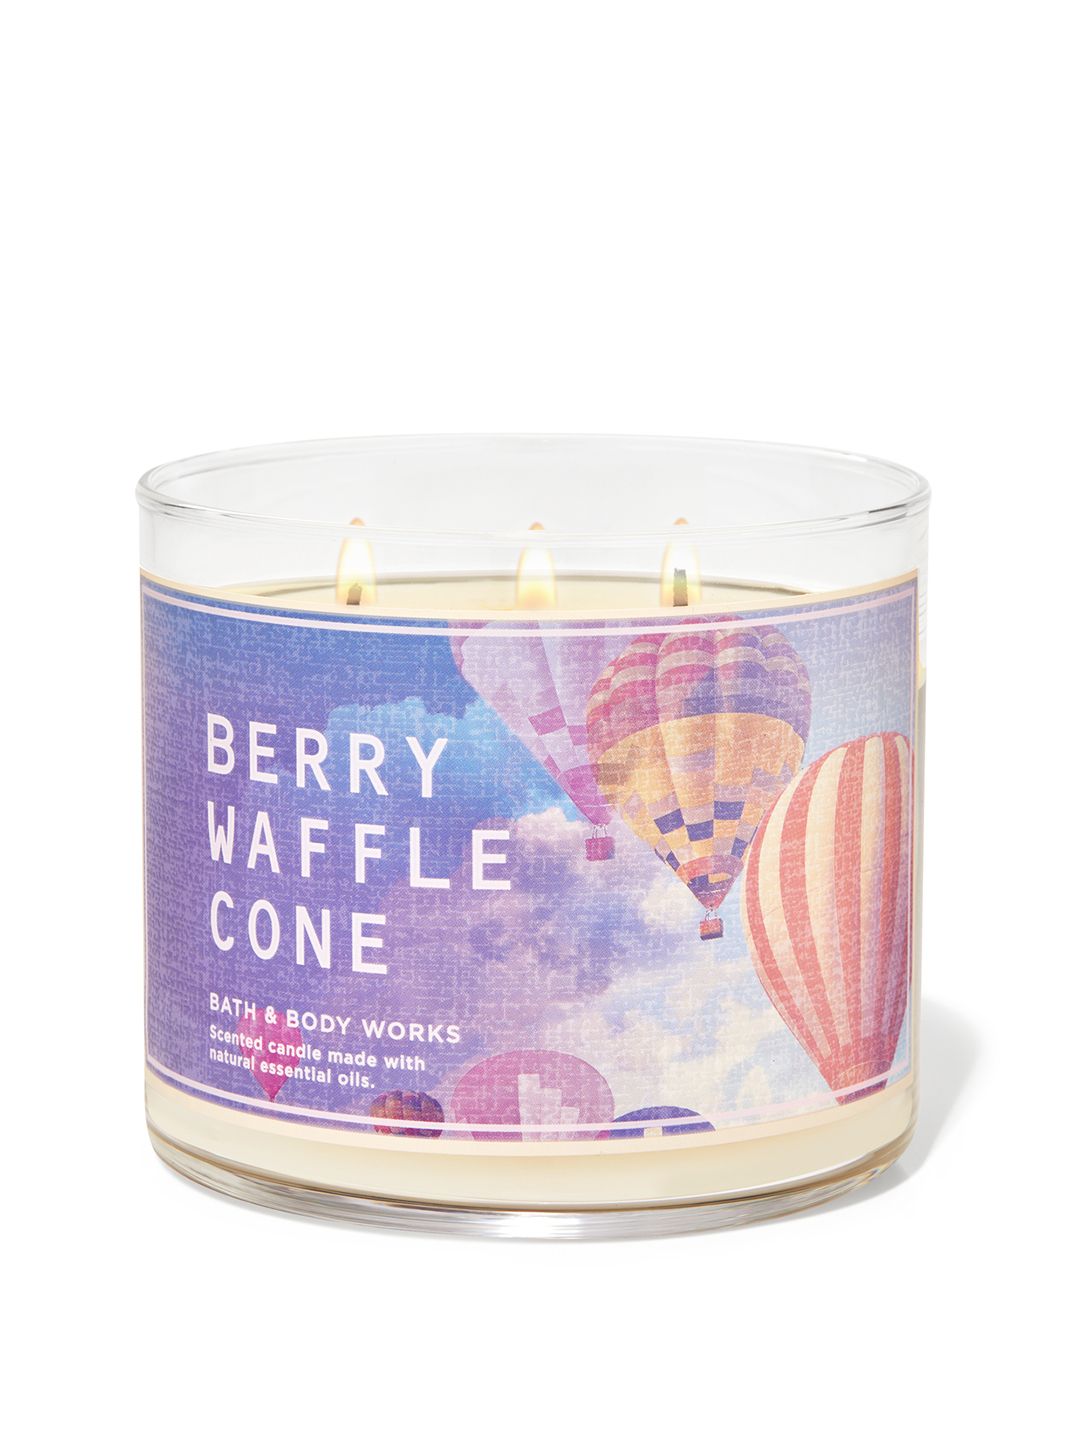 Bath & Body Works Berry Waffle Cone 3-Wick Scented Candle with Essential Oils - 411g Price in India